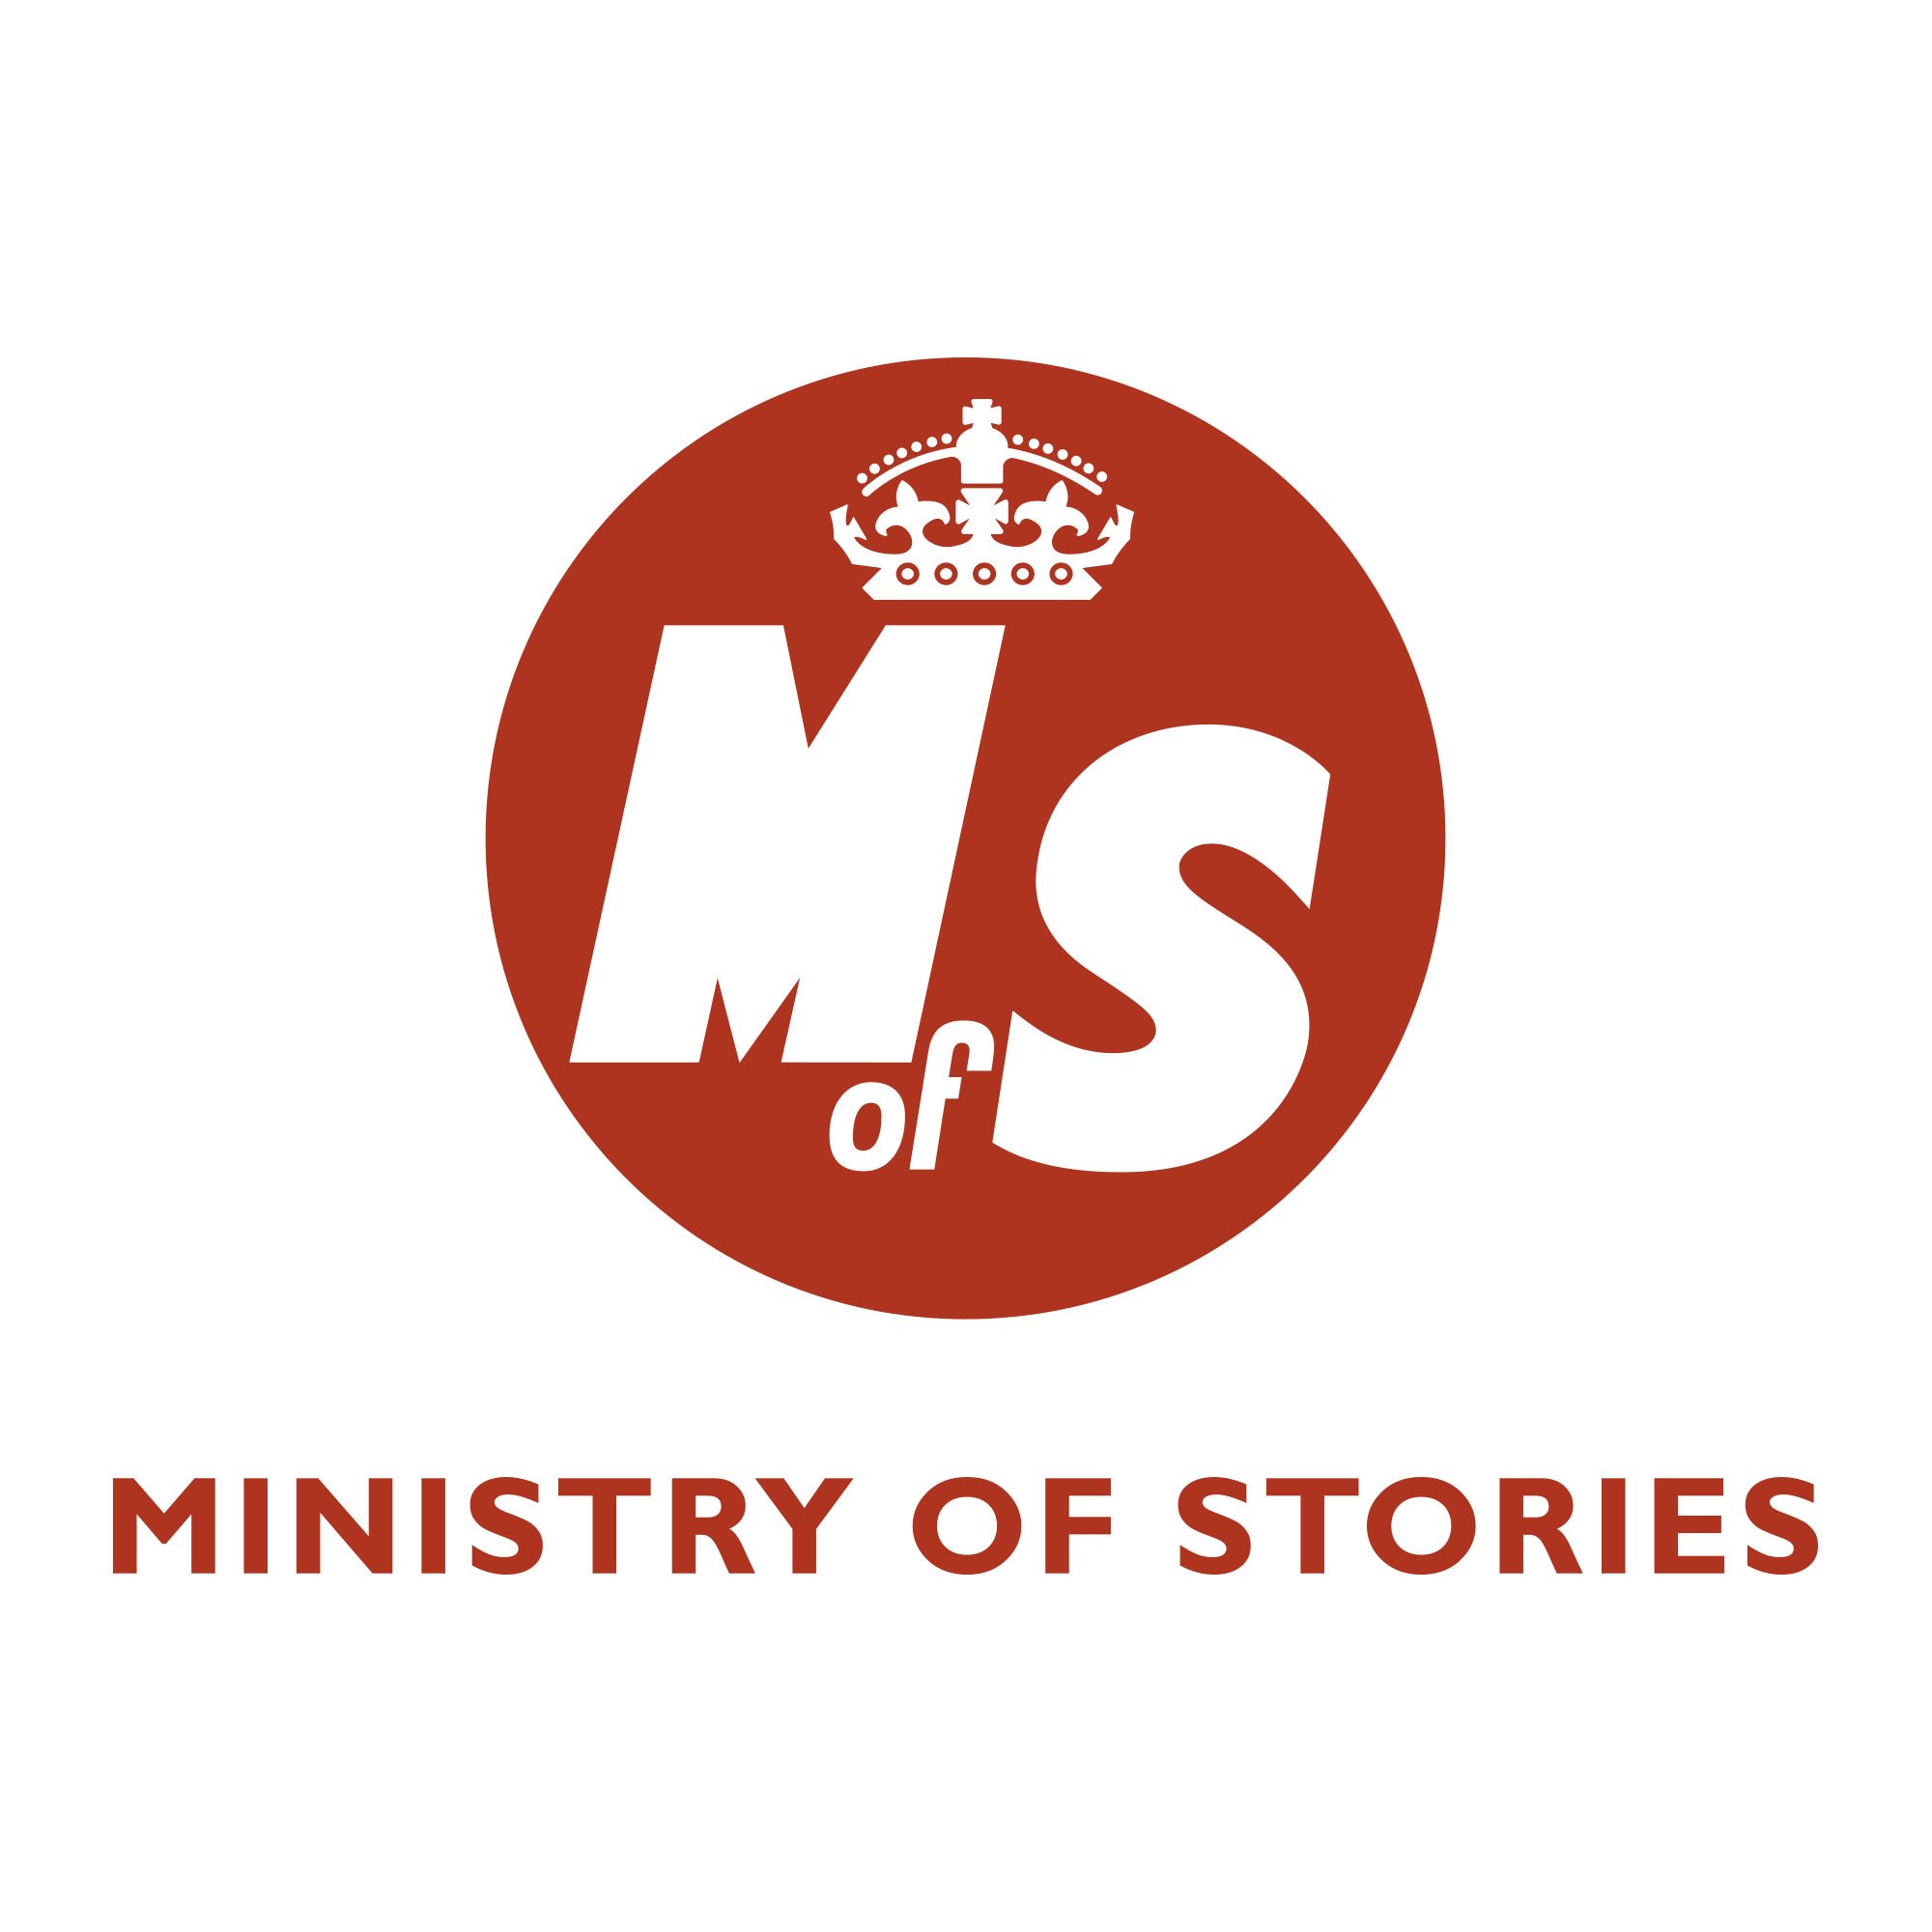 Ministry of Stories, London, England 